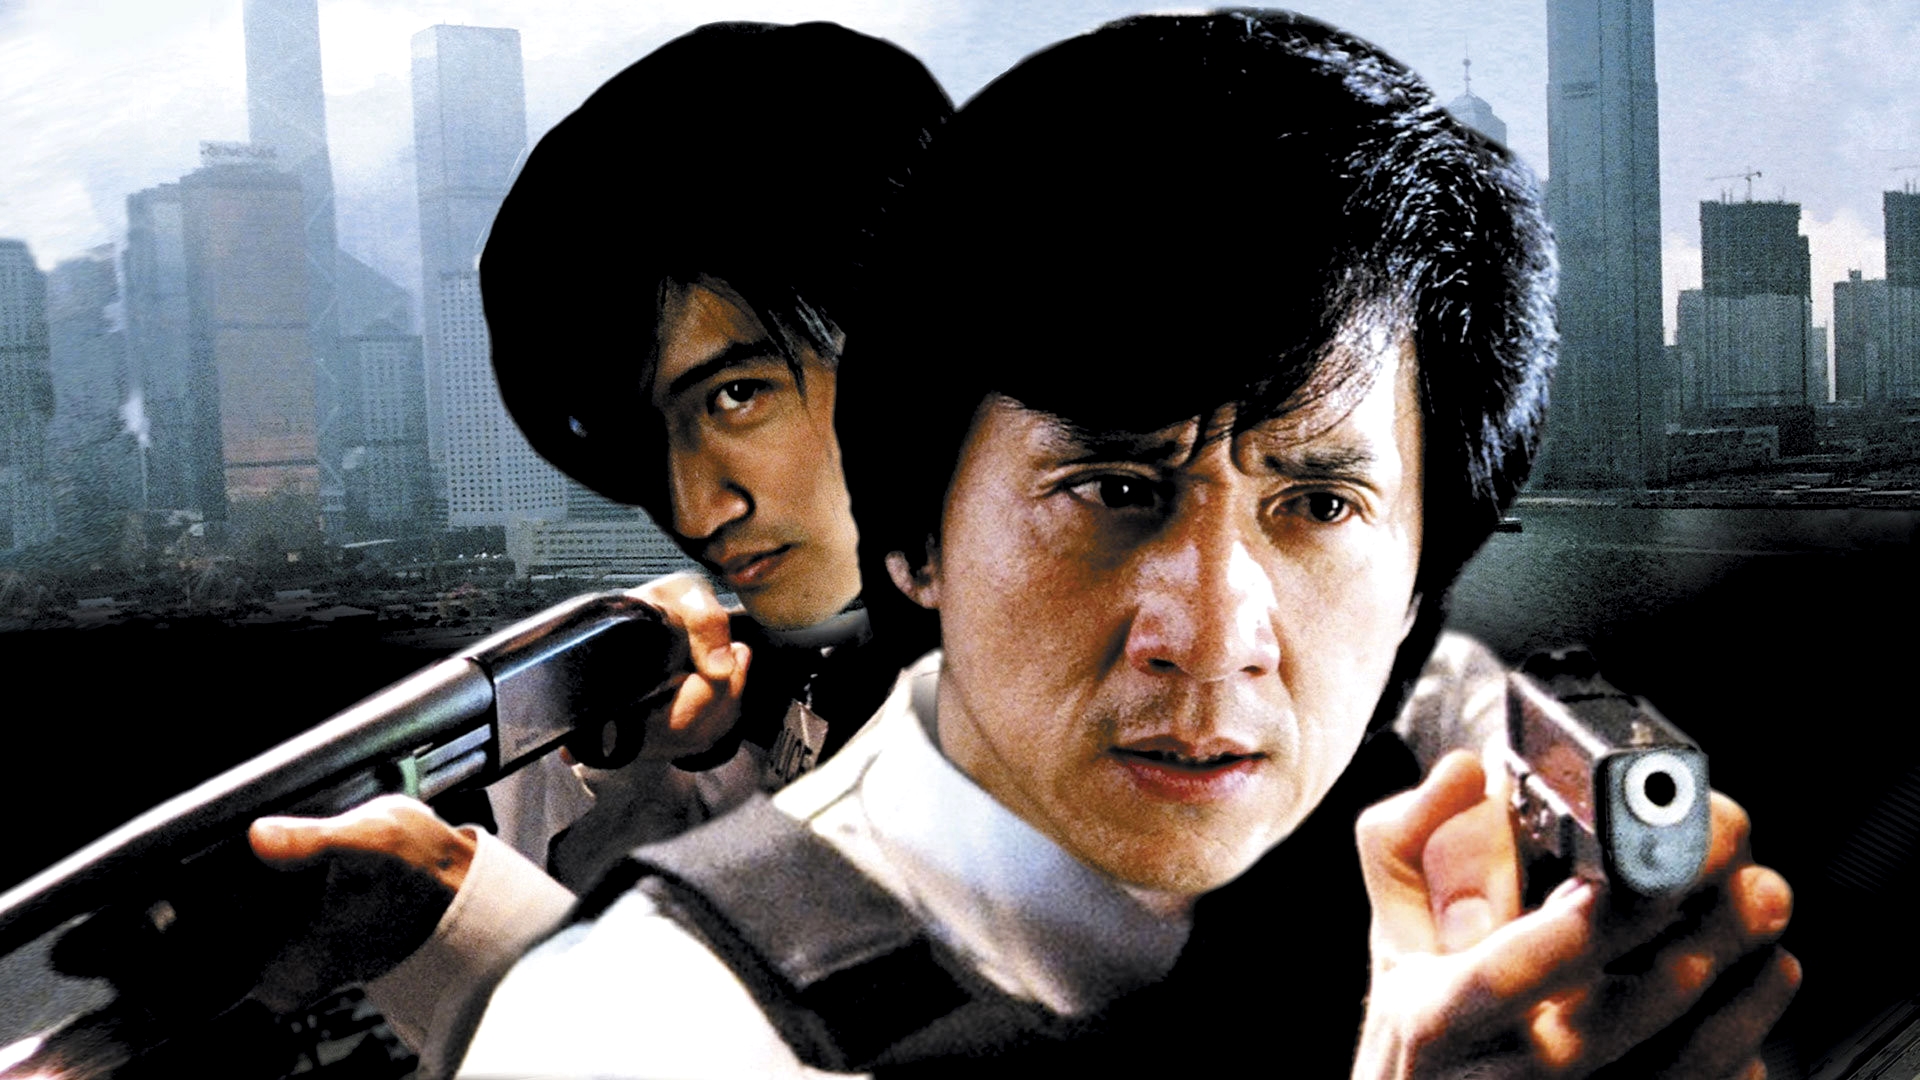 Police Story Picture